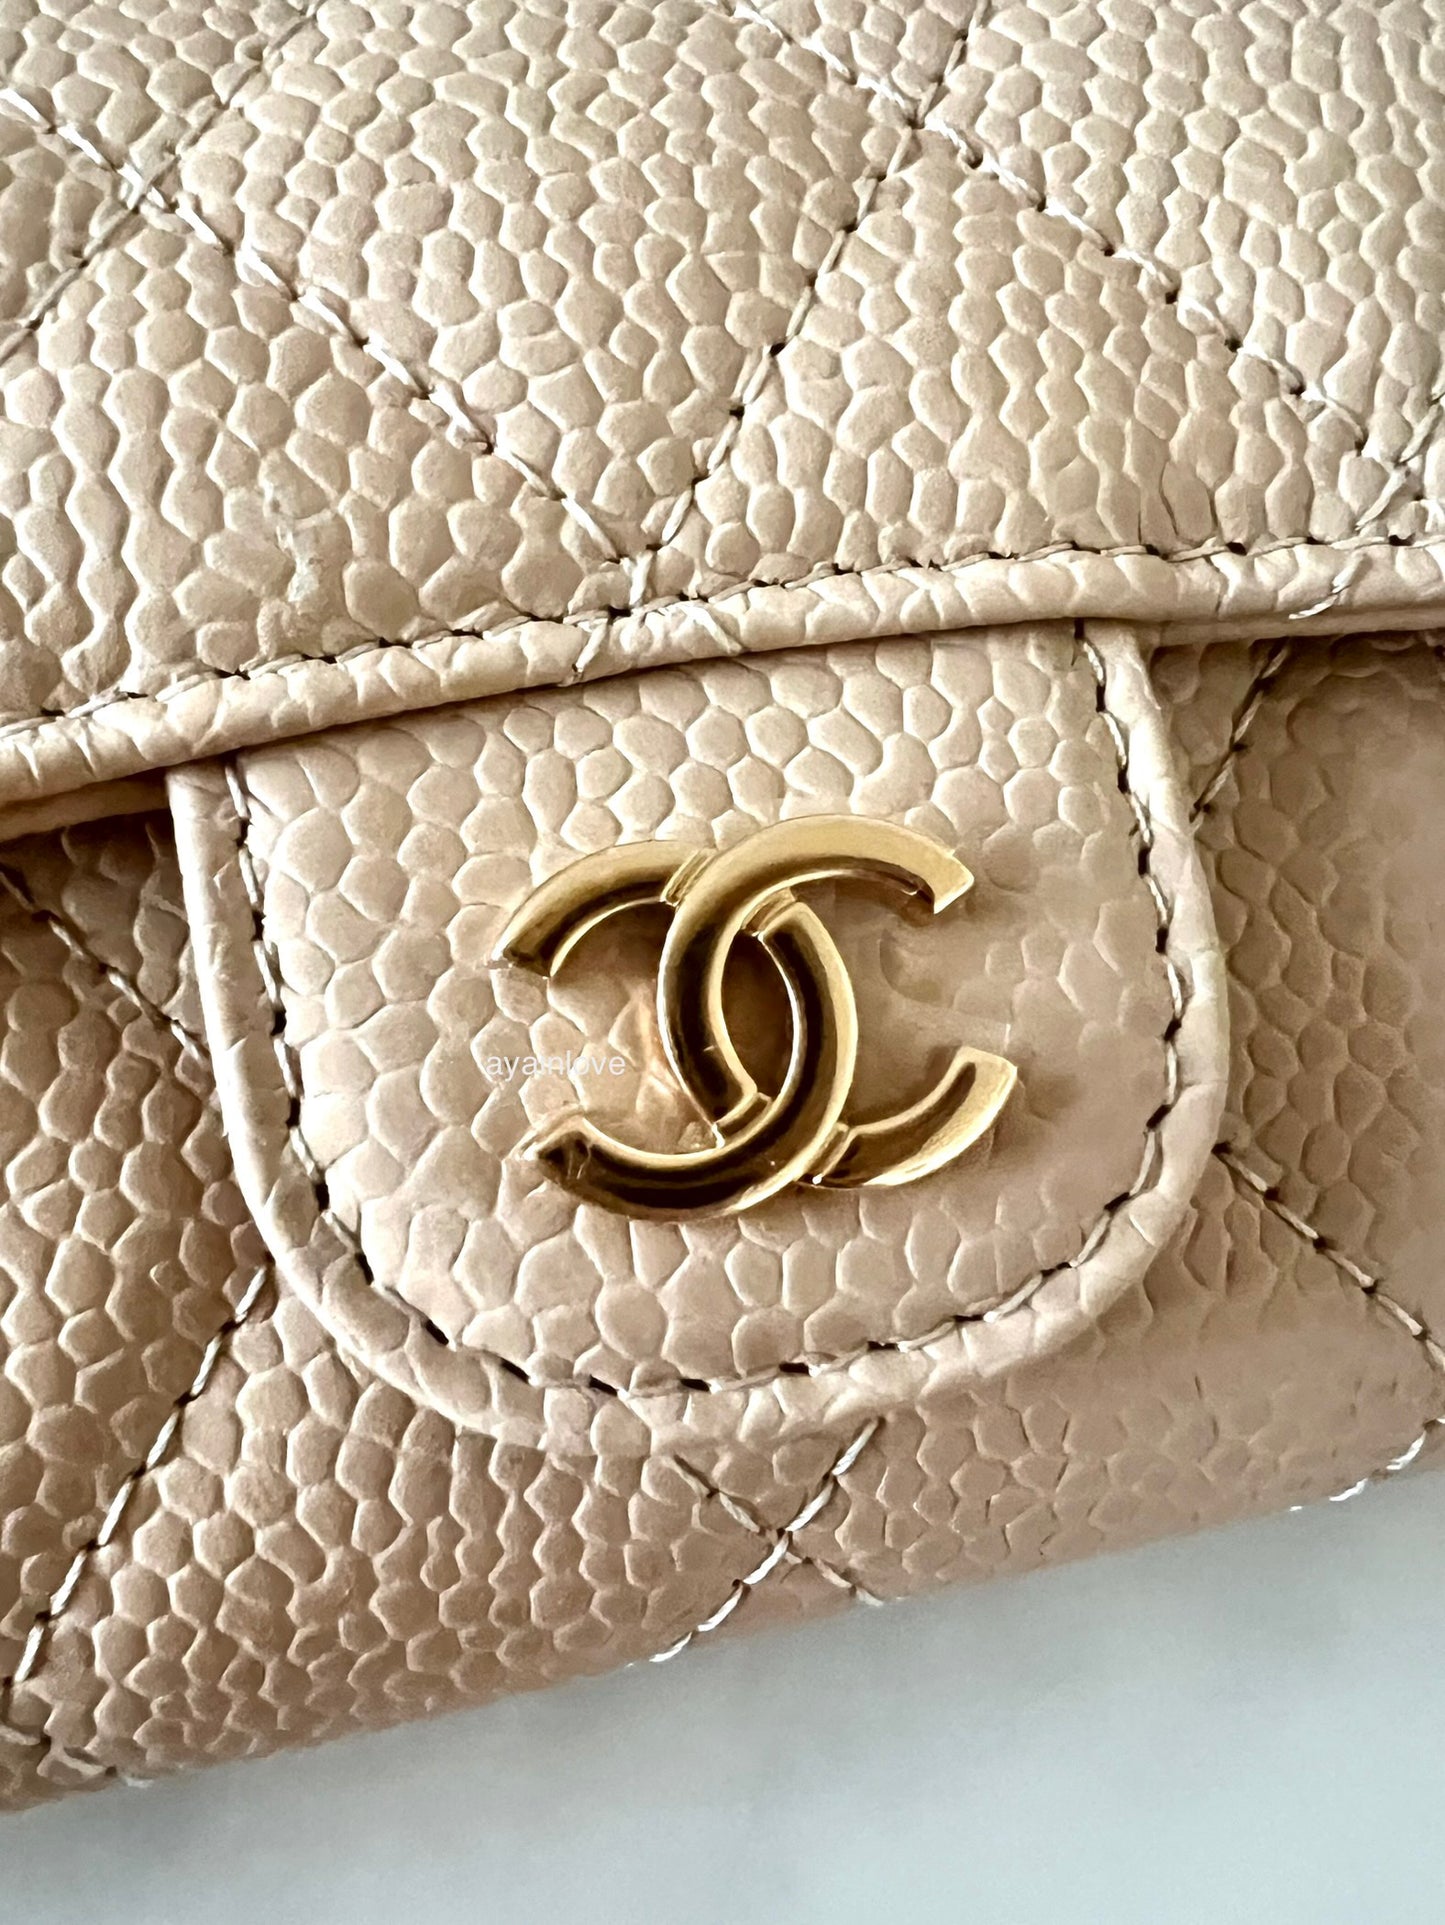 CHANEL Classic Beige Clair Caviar Small Snap Card Holder Gold